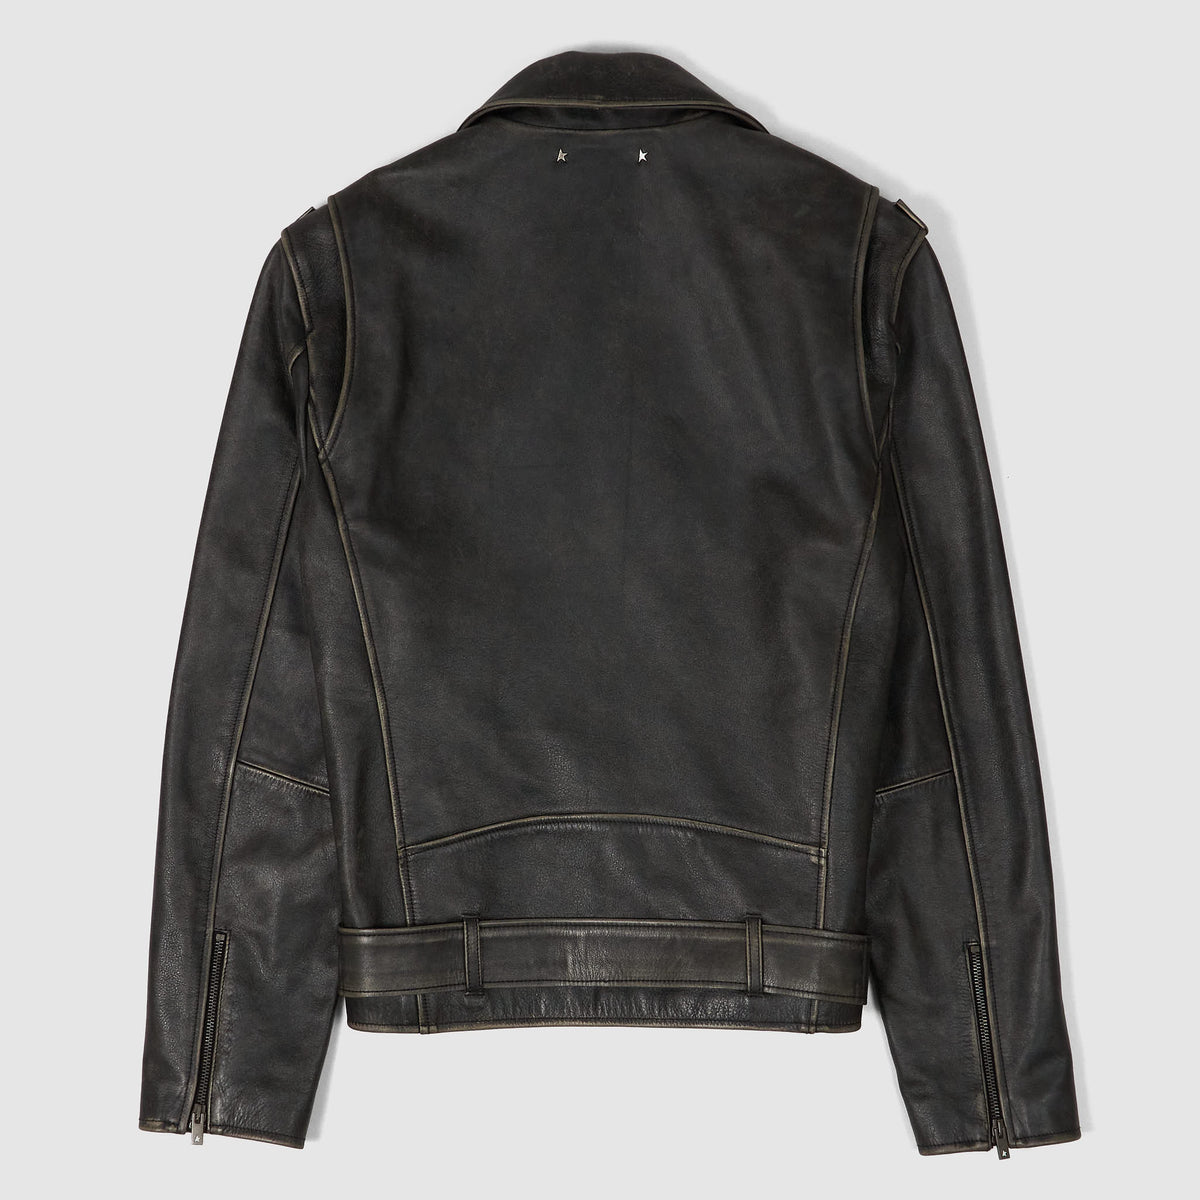 Golden Goose Distressed Bull Leather Jacket